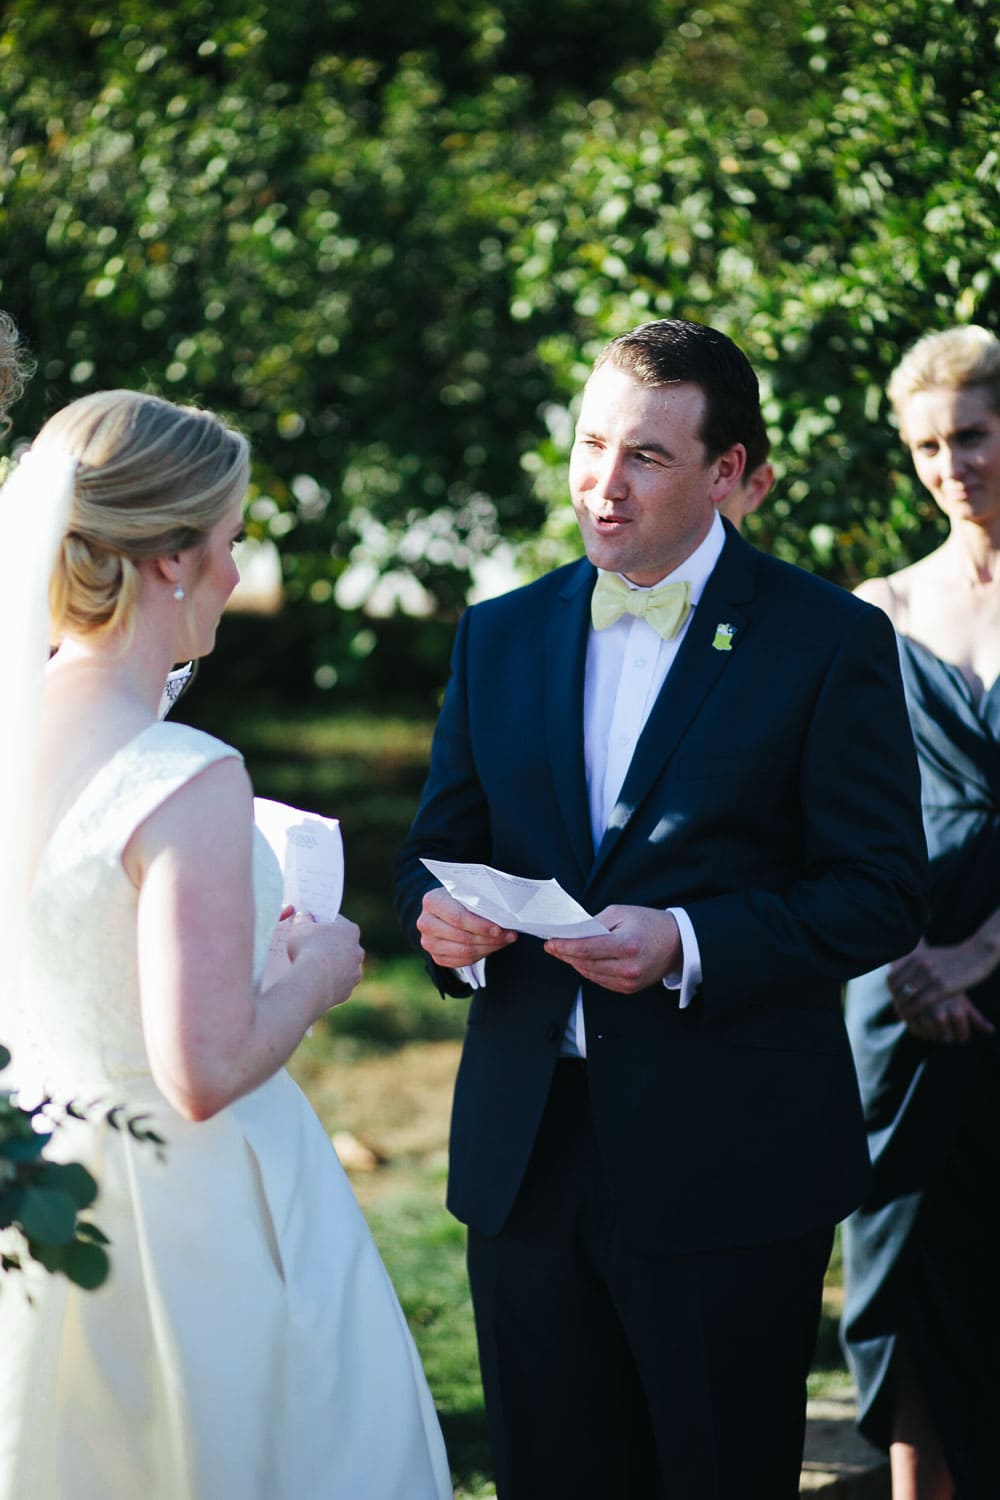 groom during vows at outdoor ceremony